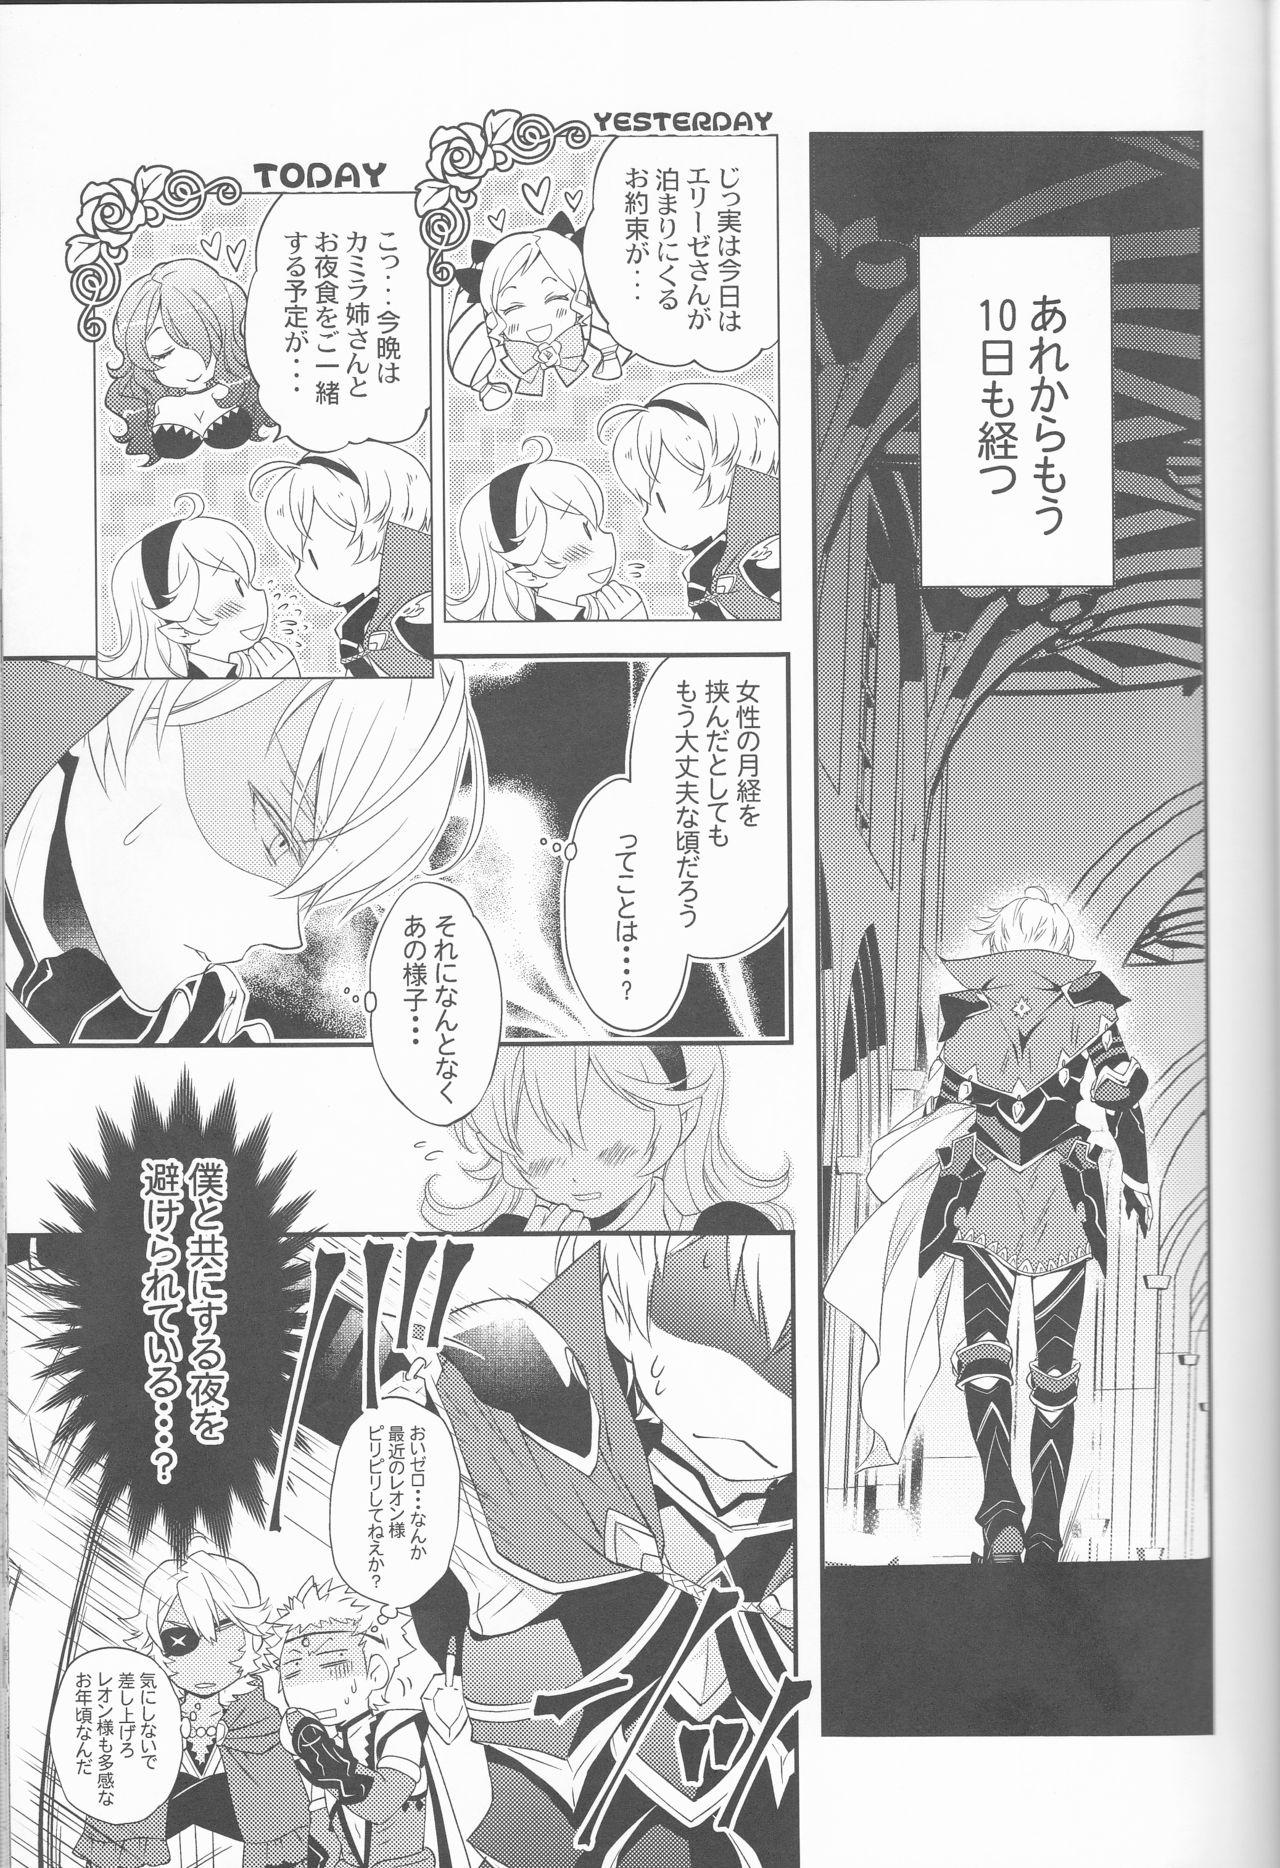 Leaked CROSSING LOVE - Fire emblem if Smoking - Page 9